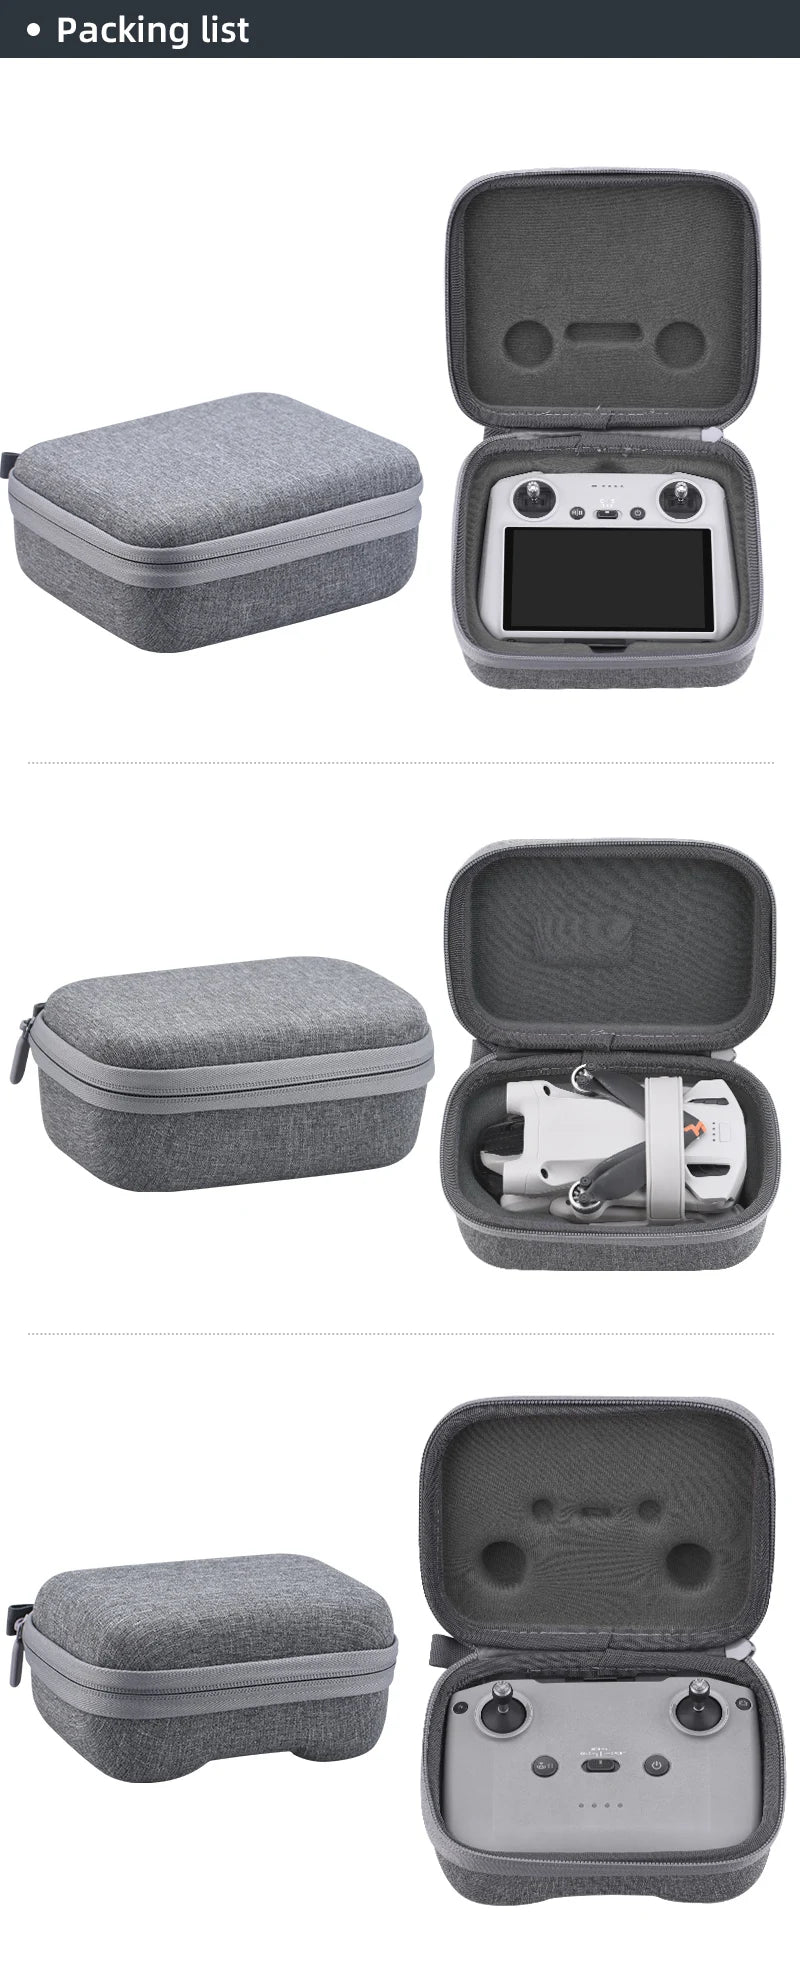 Storage Bag for DJI Mini 3 Pro, case design to protect your drone and accessories from accidental bumps, dents and scratches .